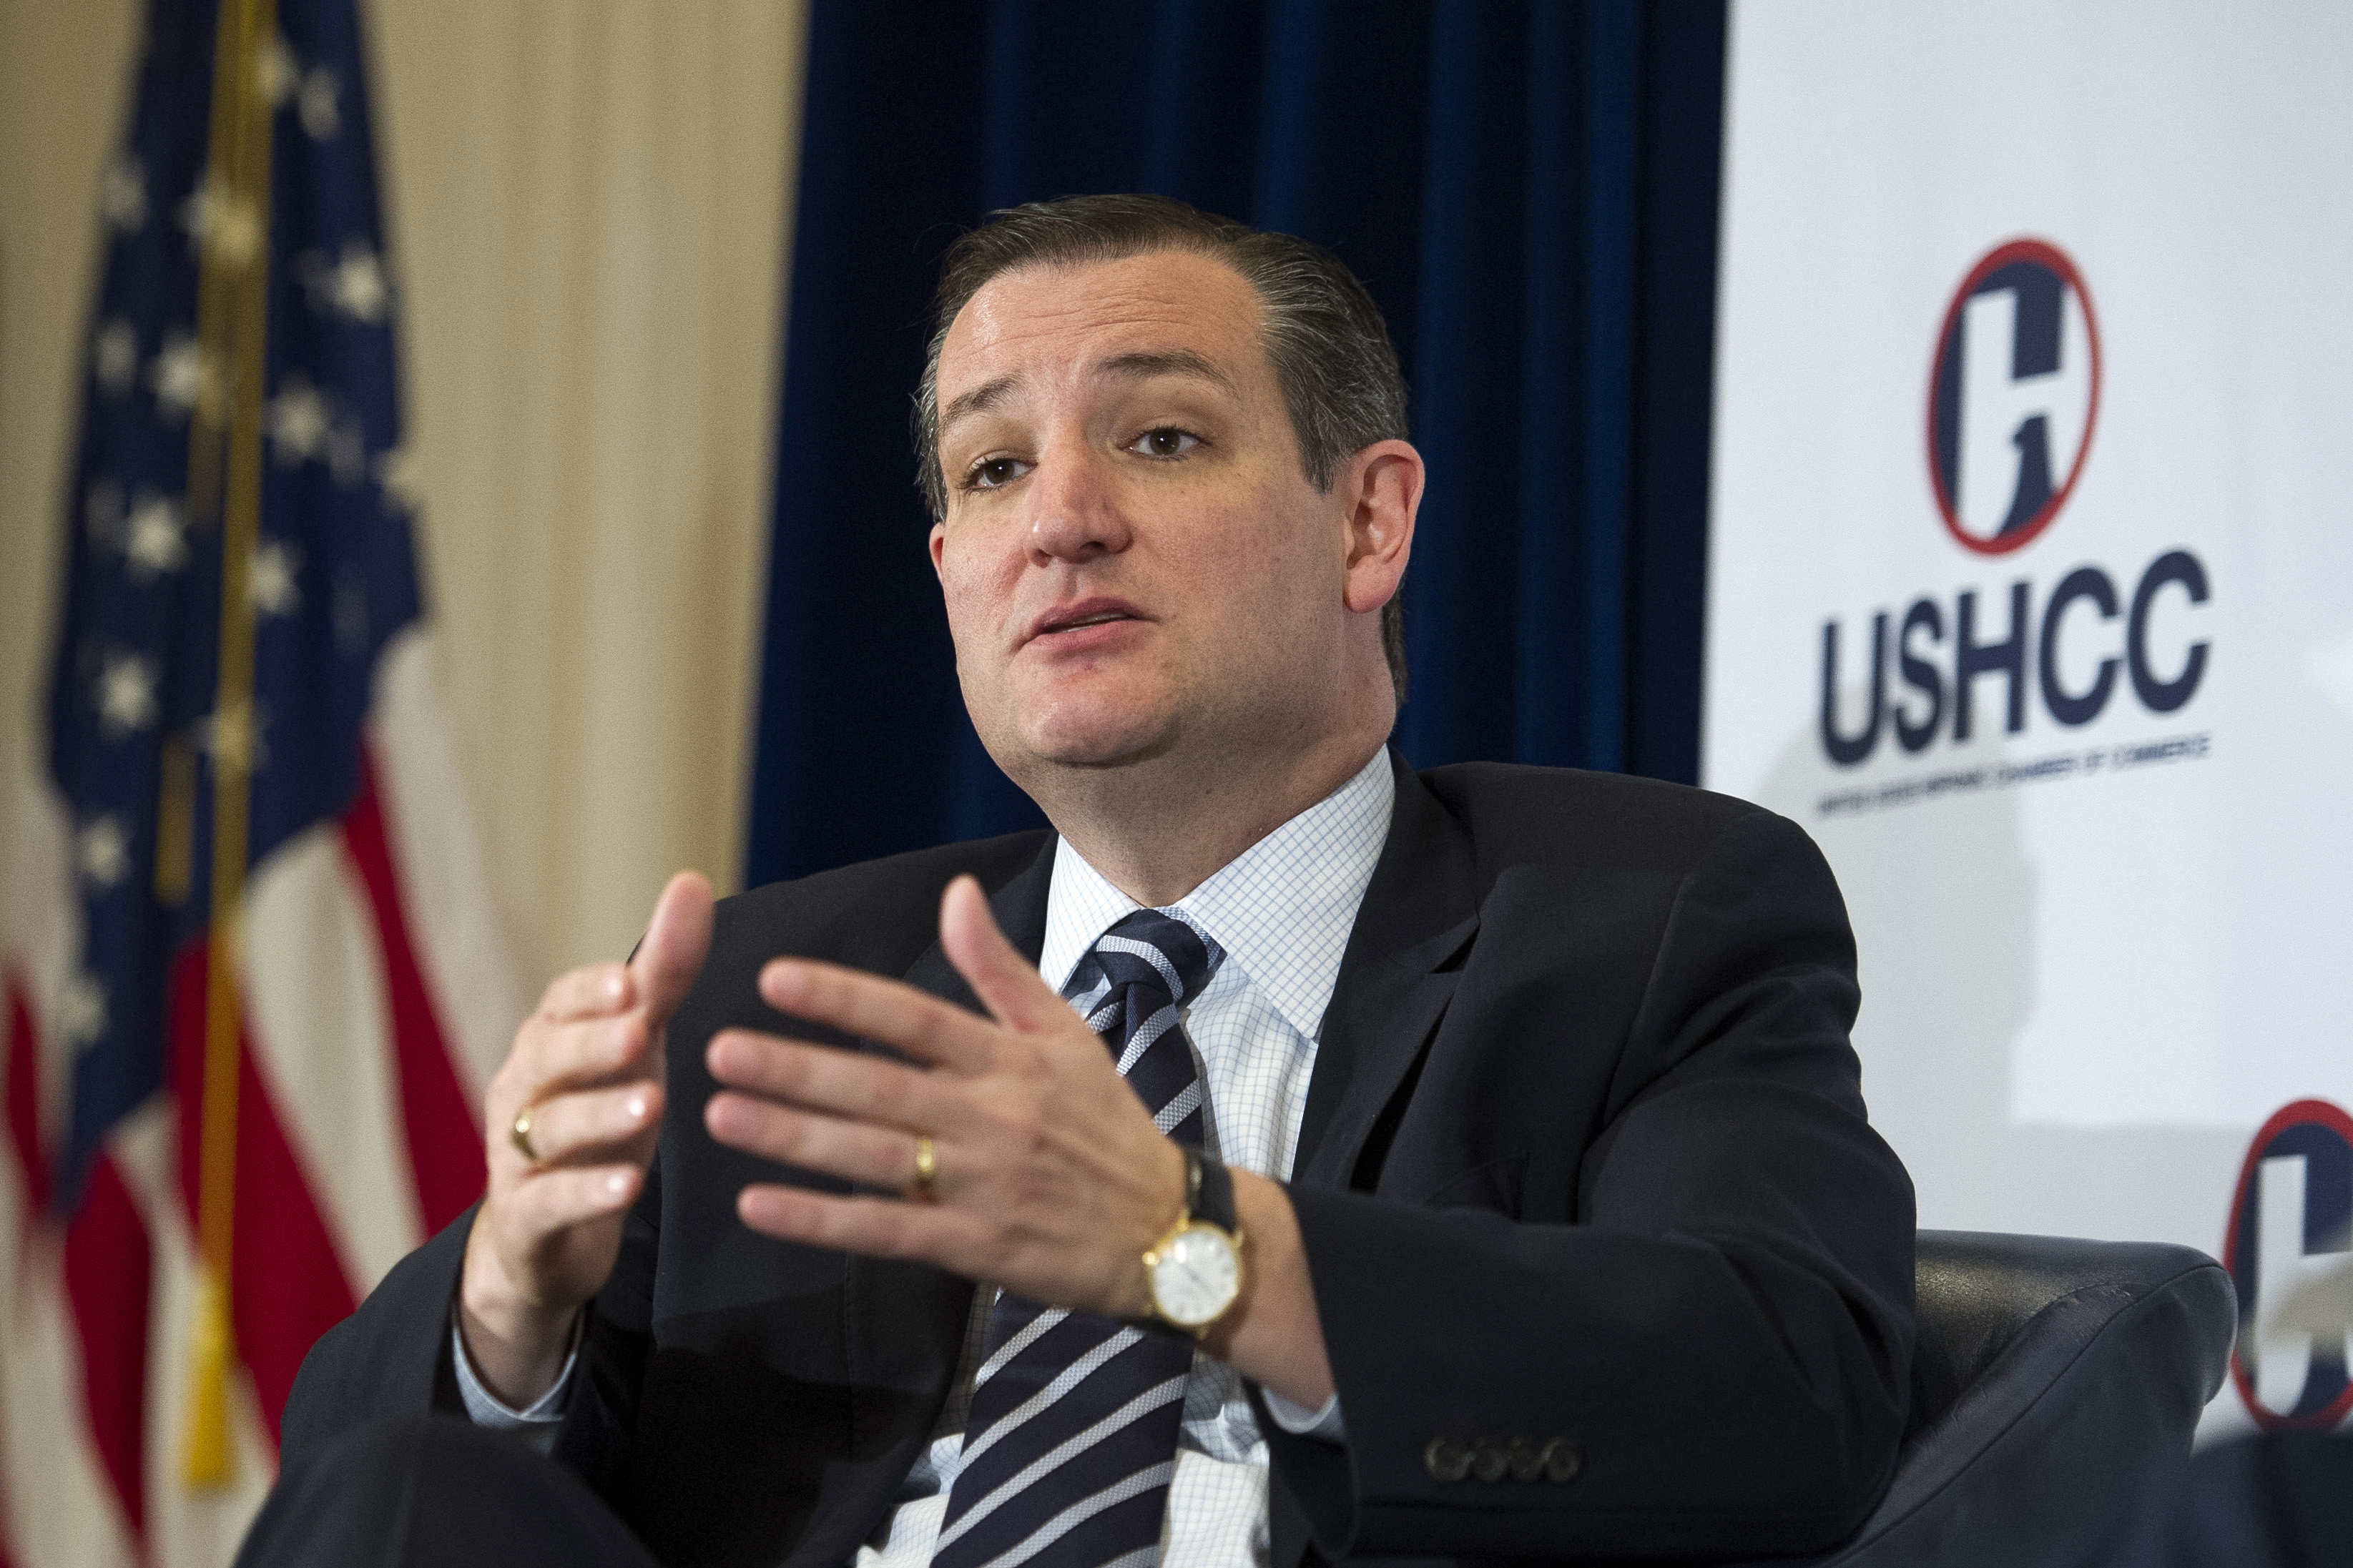 Republican presidential candidate Sen. Ted Cruz, R-Texas gestures while he talks at the U.S. Hispanic Chamber of Commerce (USHCC), on April 29, 2015, at the National Press Club in Washington. (Cliff Owen—AP)